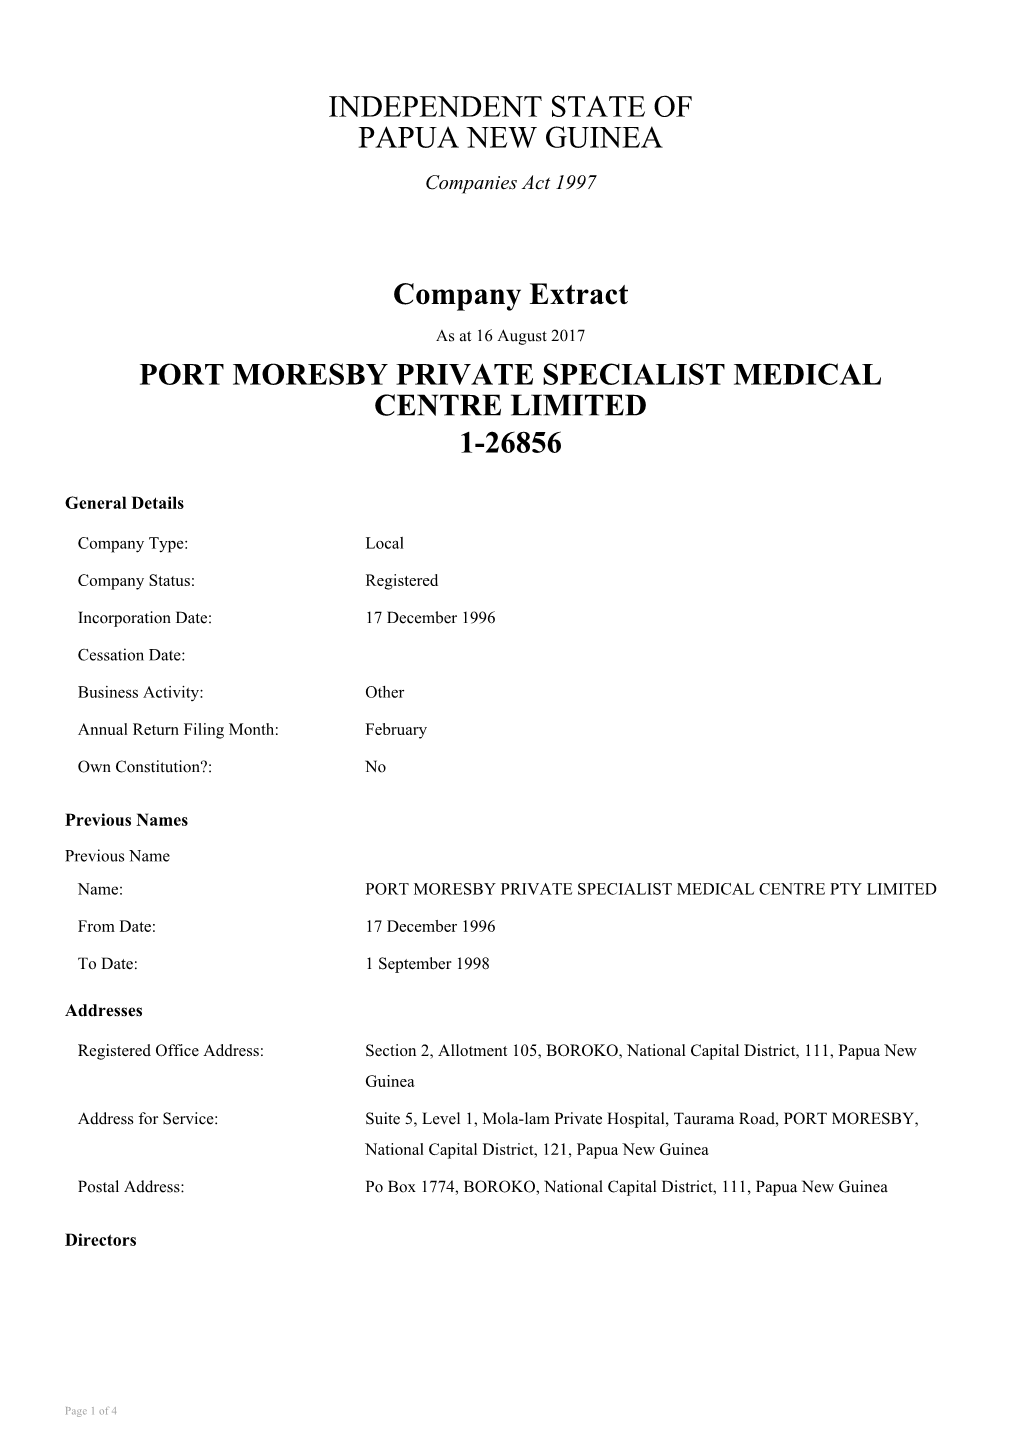 INDEPENDENT STATE of PAPUA NEW GUINEA Company Extract PORT MORESBY PRIVATE SPECIALIST MEDICAL CENTRE LIMITED 1-26856